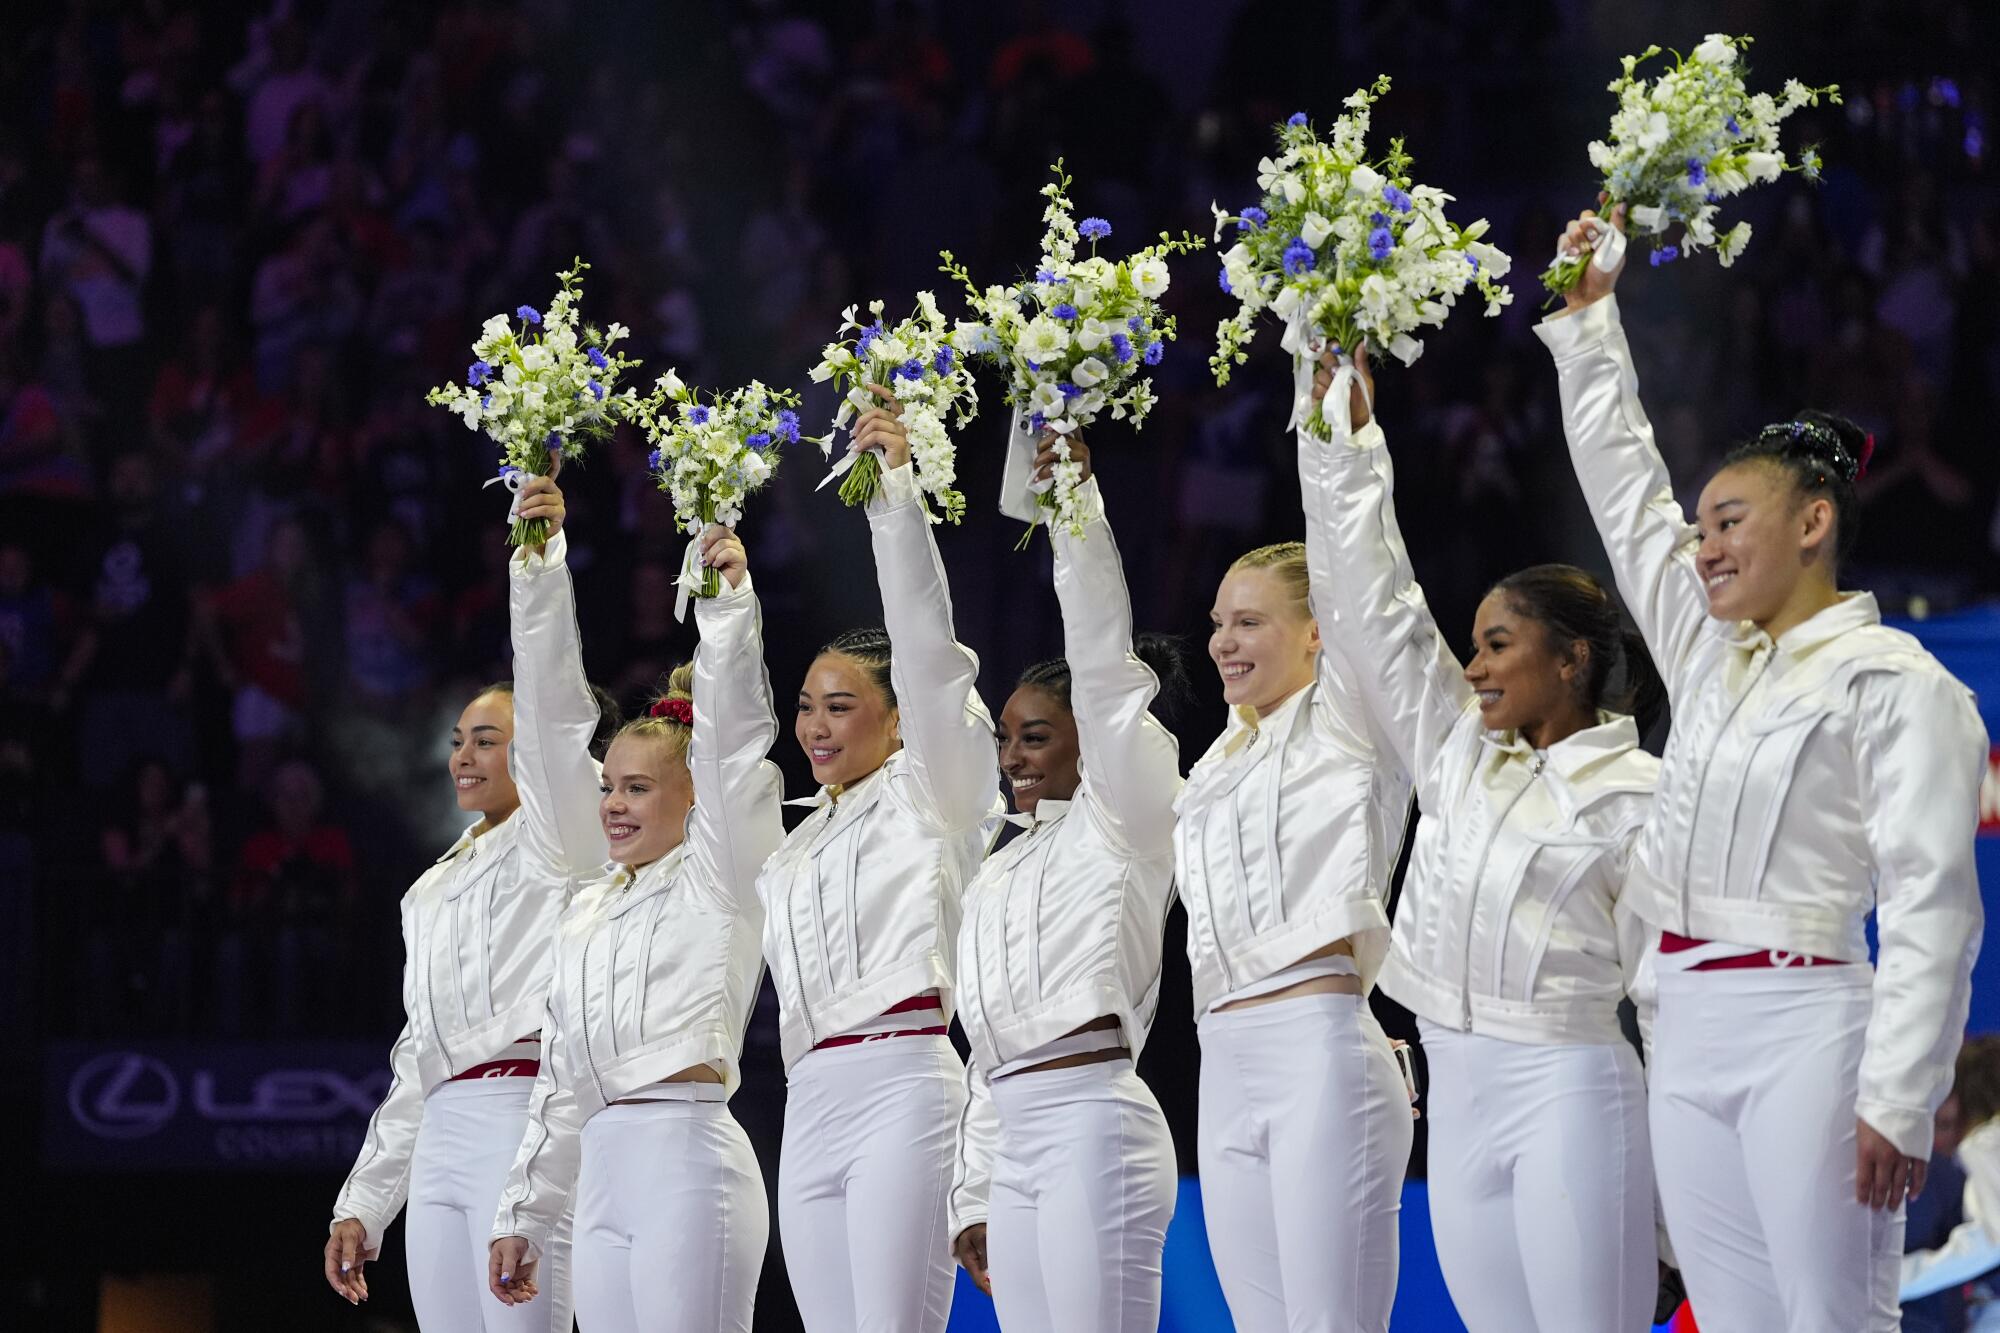 U.S. Olympic team members smile and hold up white bouquets.